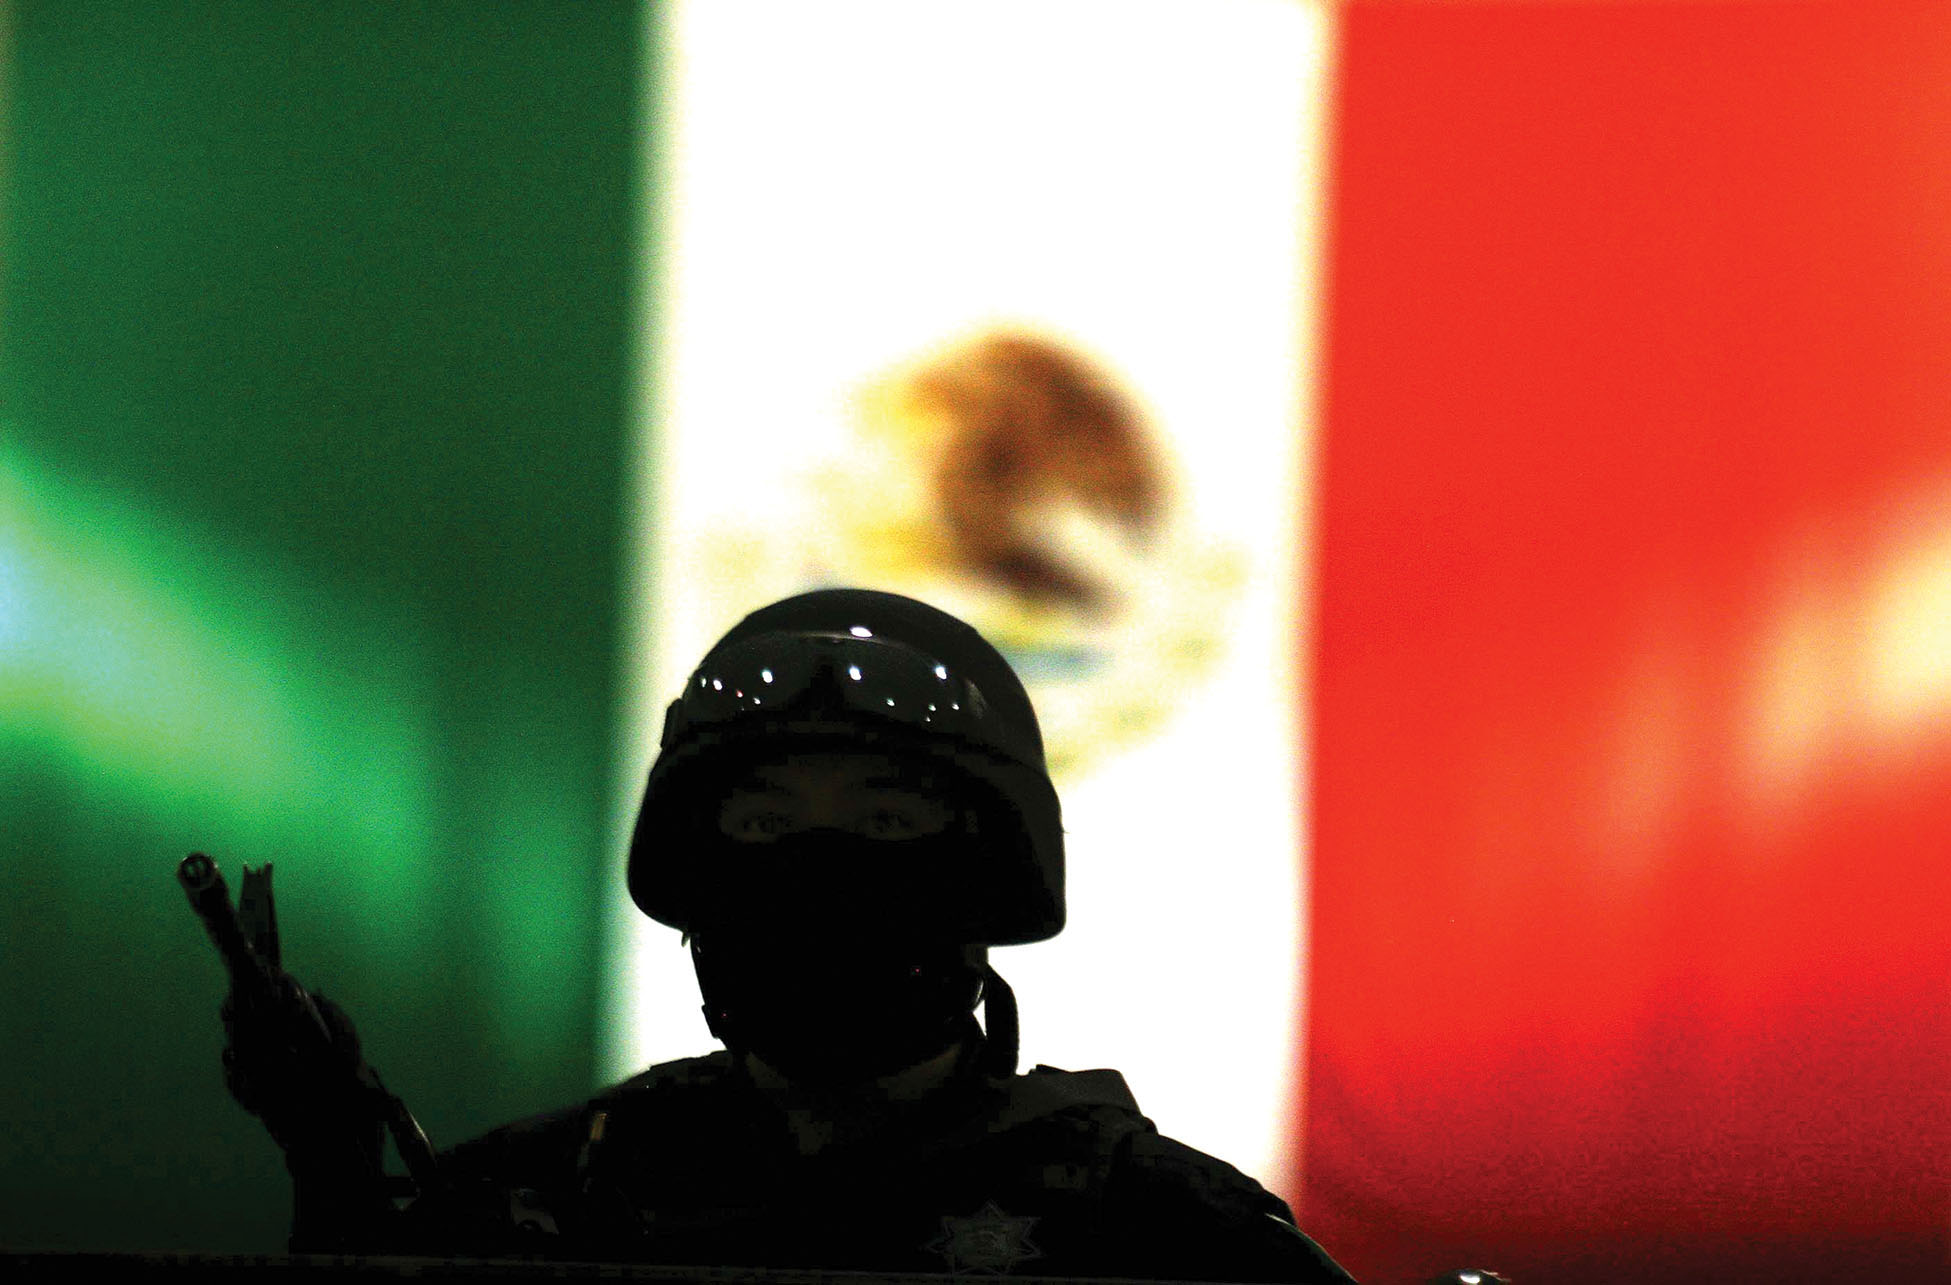 A Mexican federal policeman in tactical gear stands silhouetted before his nation’s flag. (Photo by Jesús Villaseca Pérez.)